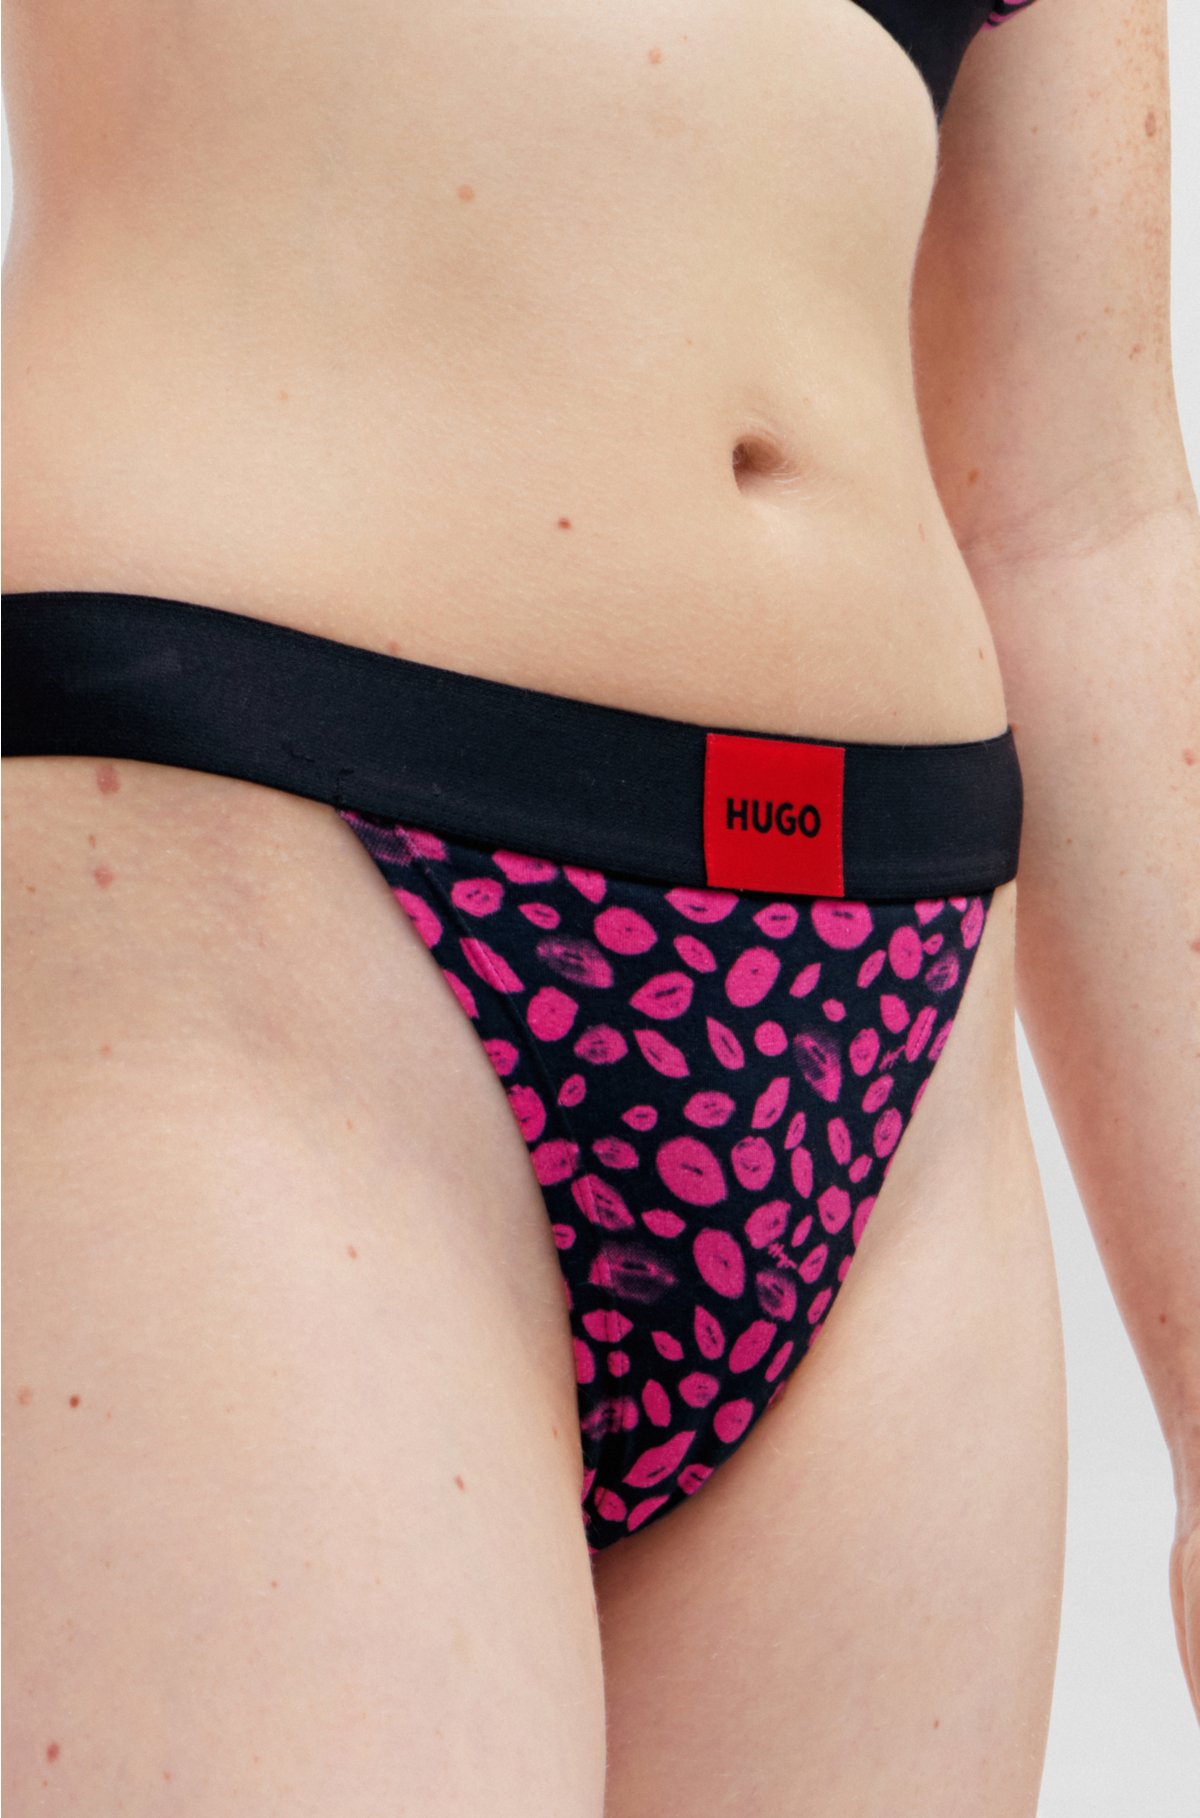 HUGO - High-waisted stretch-cotton briefs with red logo label